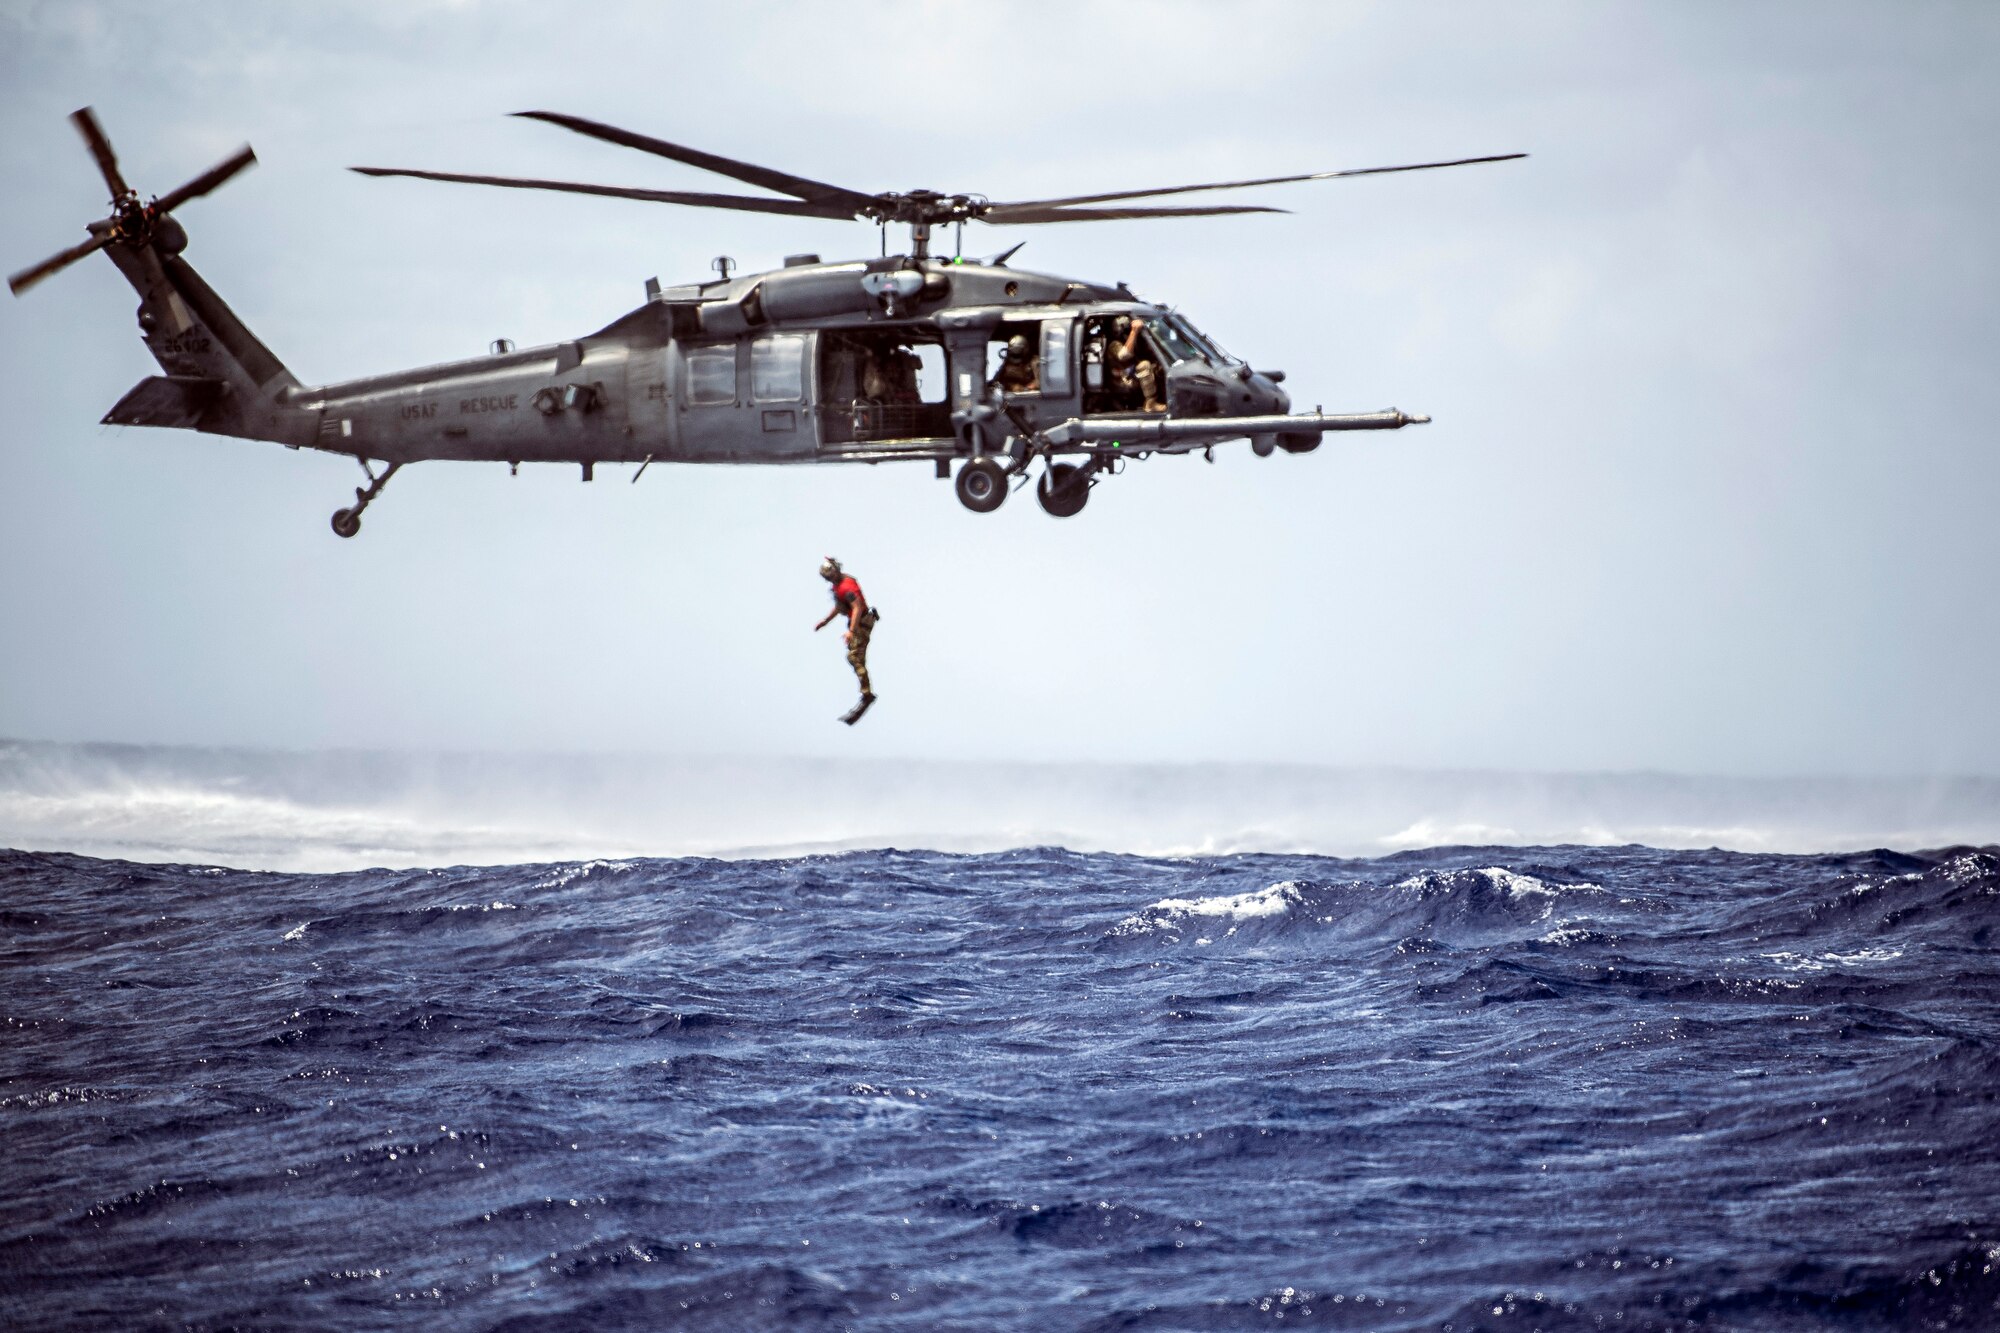 A U.S. Air Force pararescueman with the 31st Rescue Squadron jumps out of an HH-60G Pave Hawk